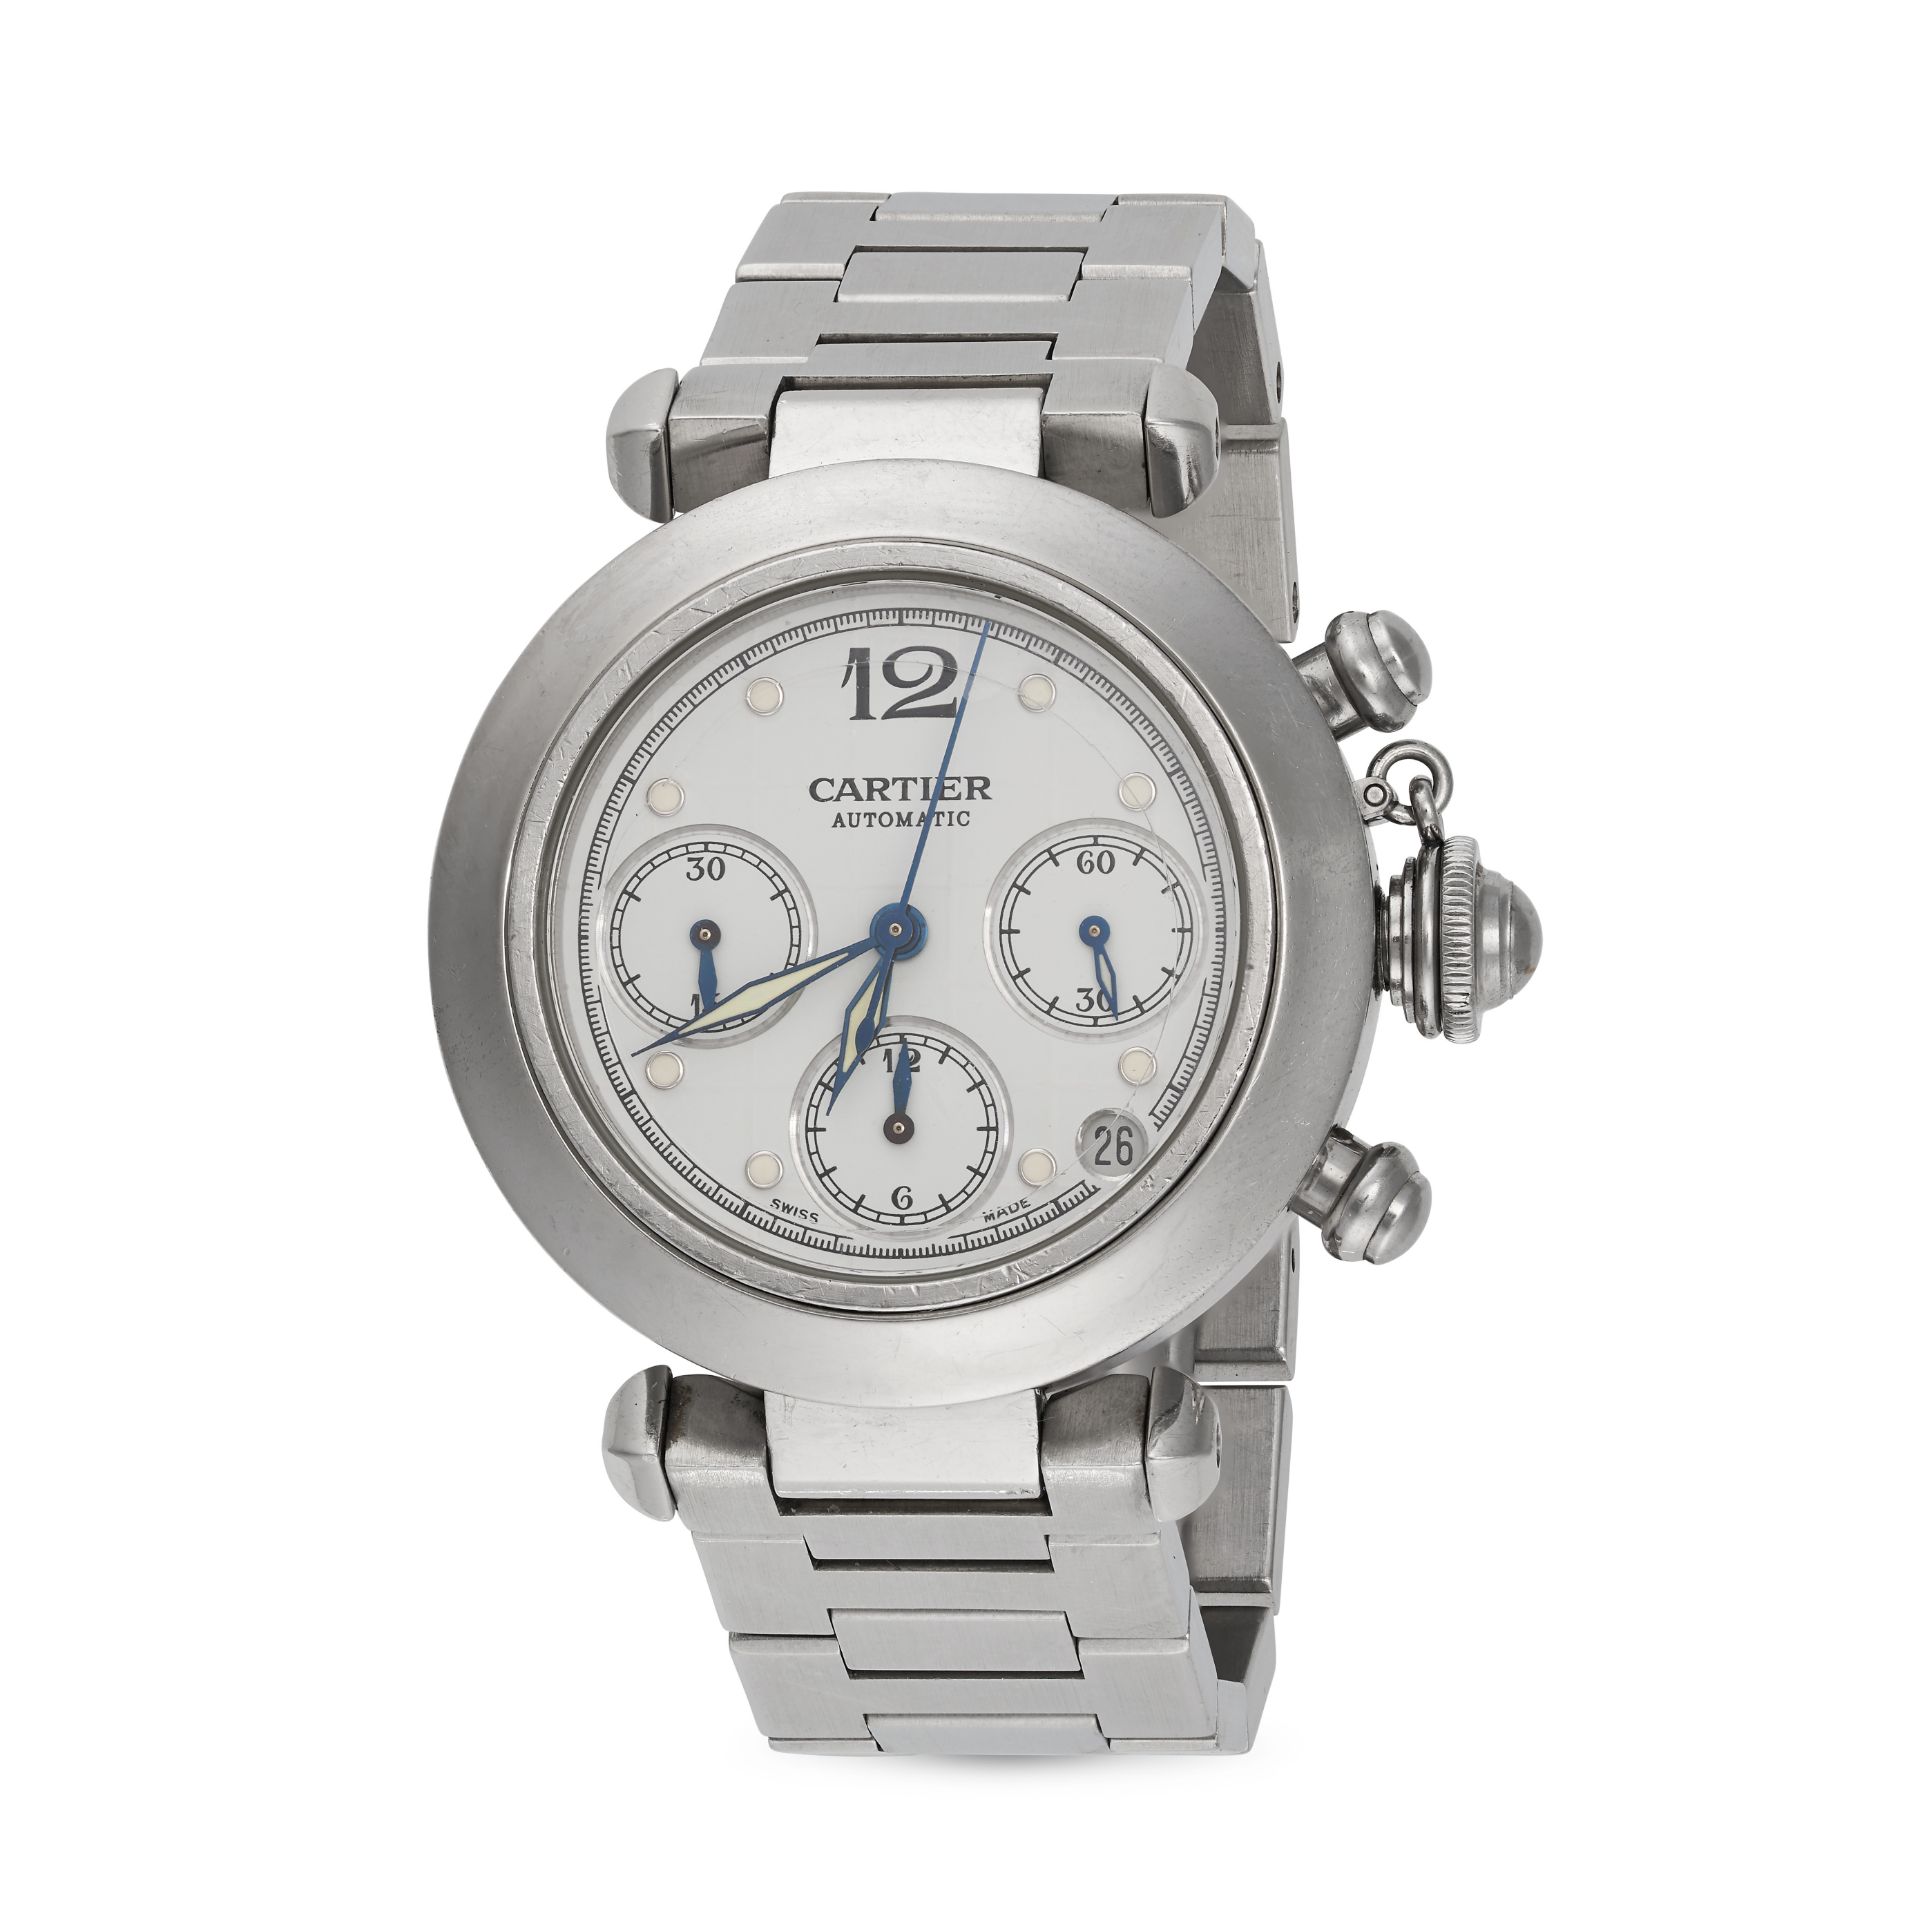 CARTIER - A CARTIER PASCHA AUTOMATIC CHRONOGRAPH WRISTWATCH in stainless steel, 2412, the circula...